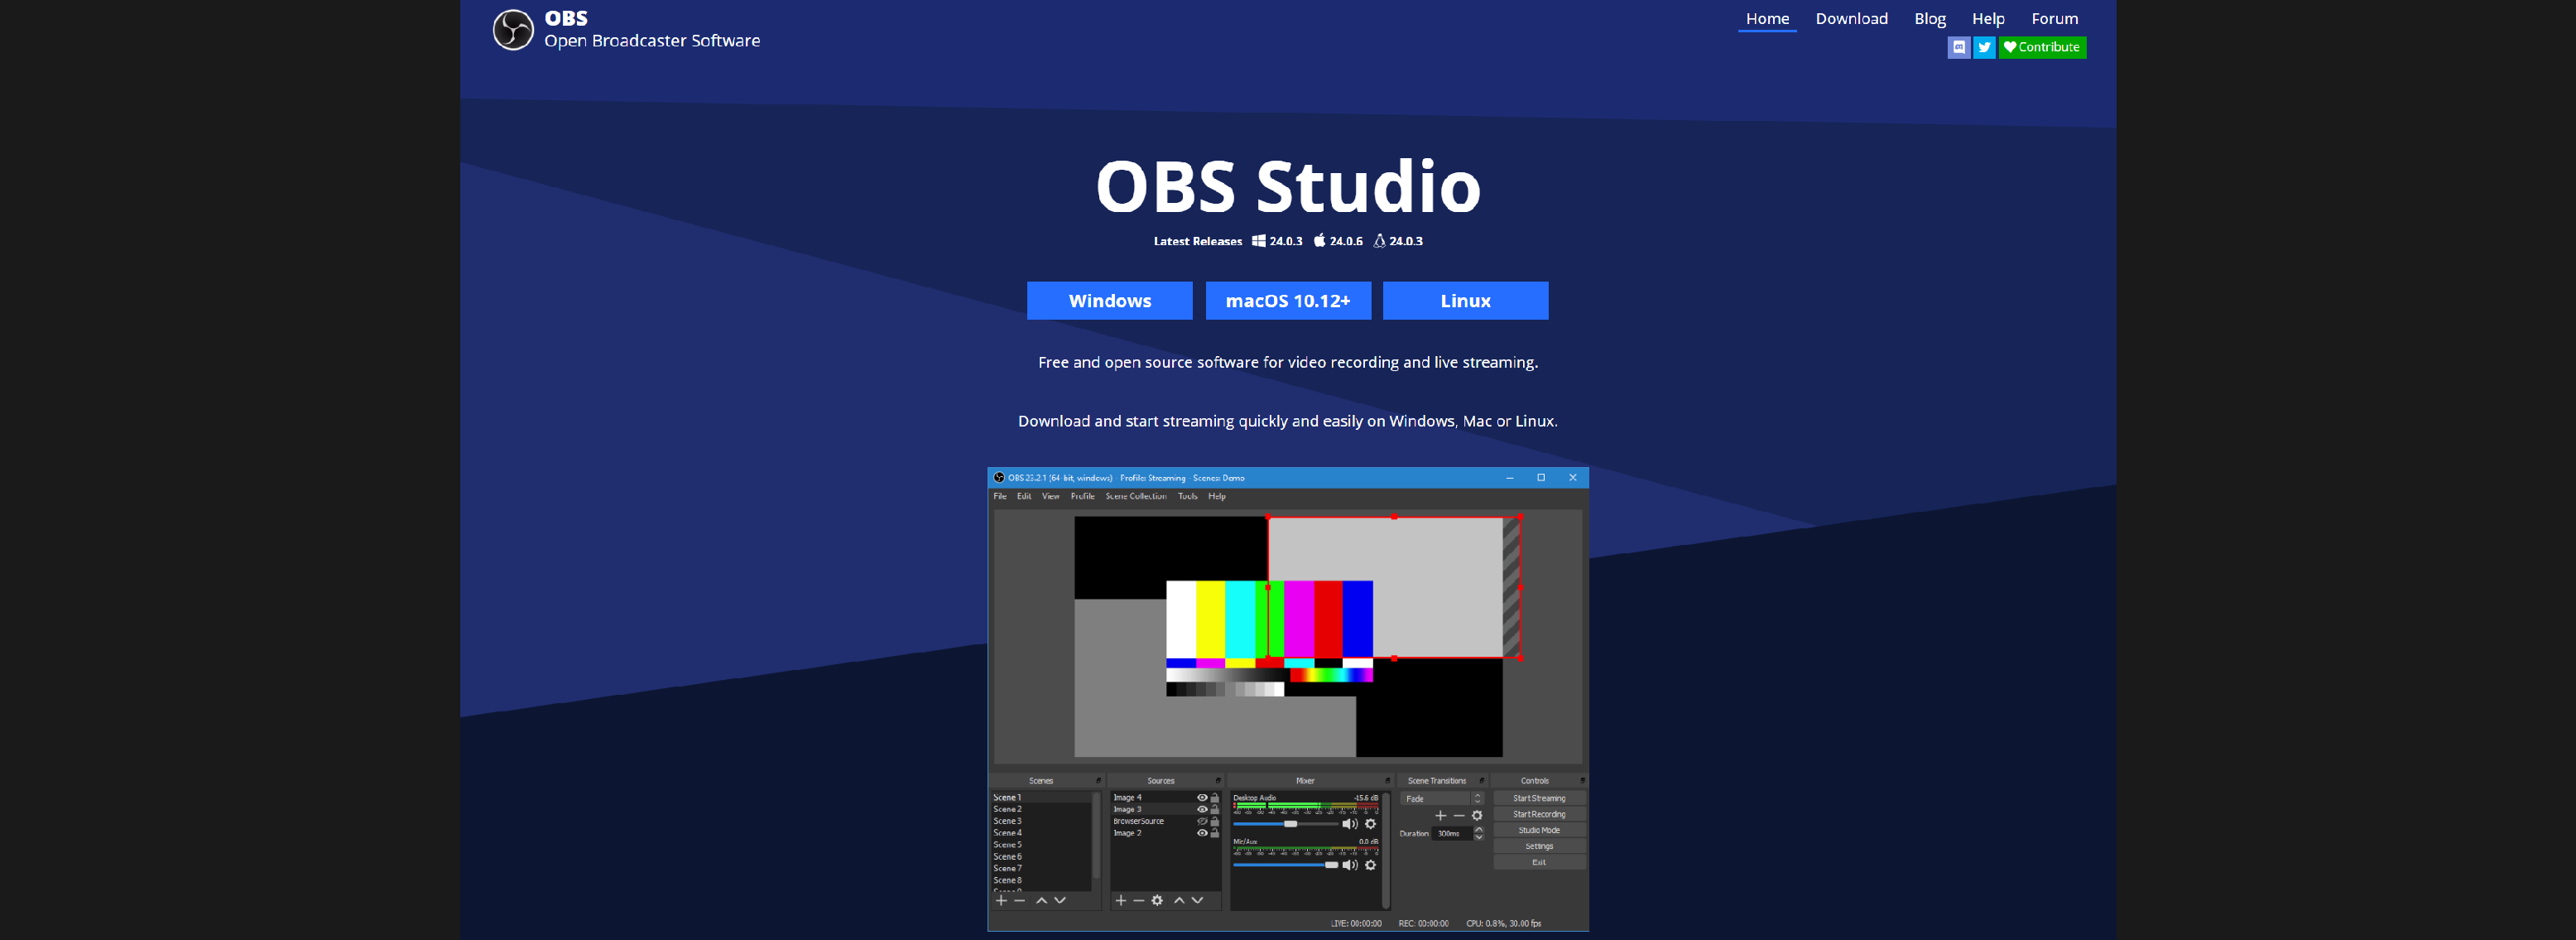 obs download windows 7